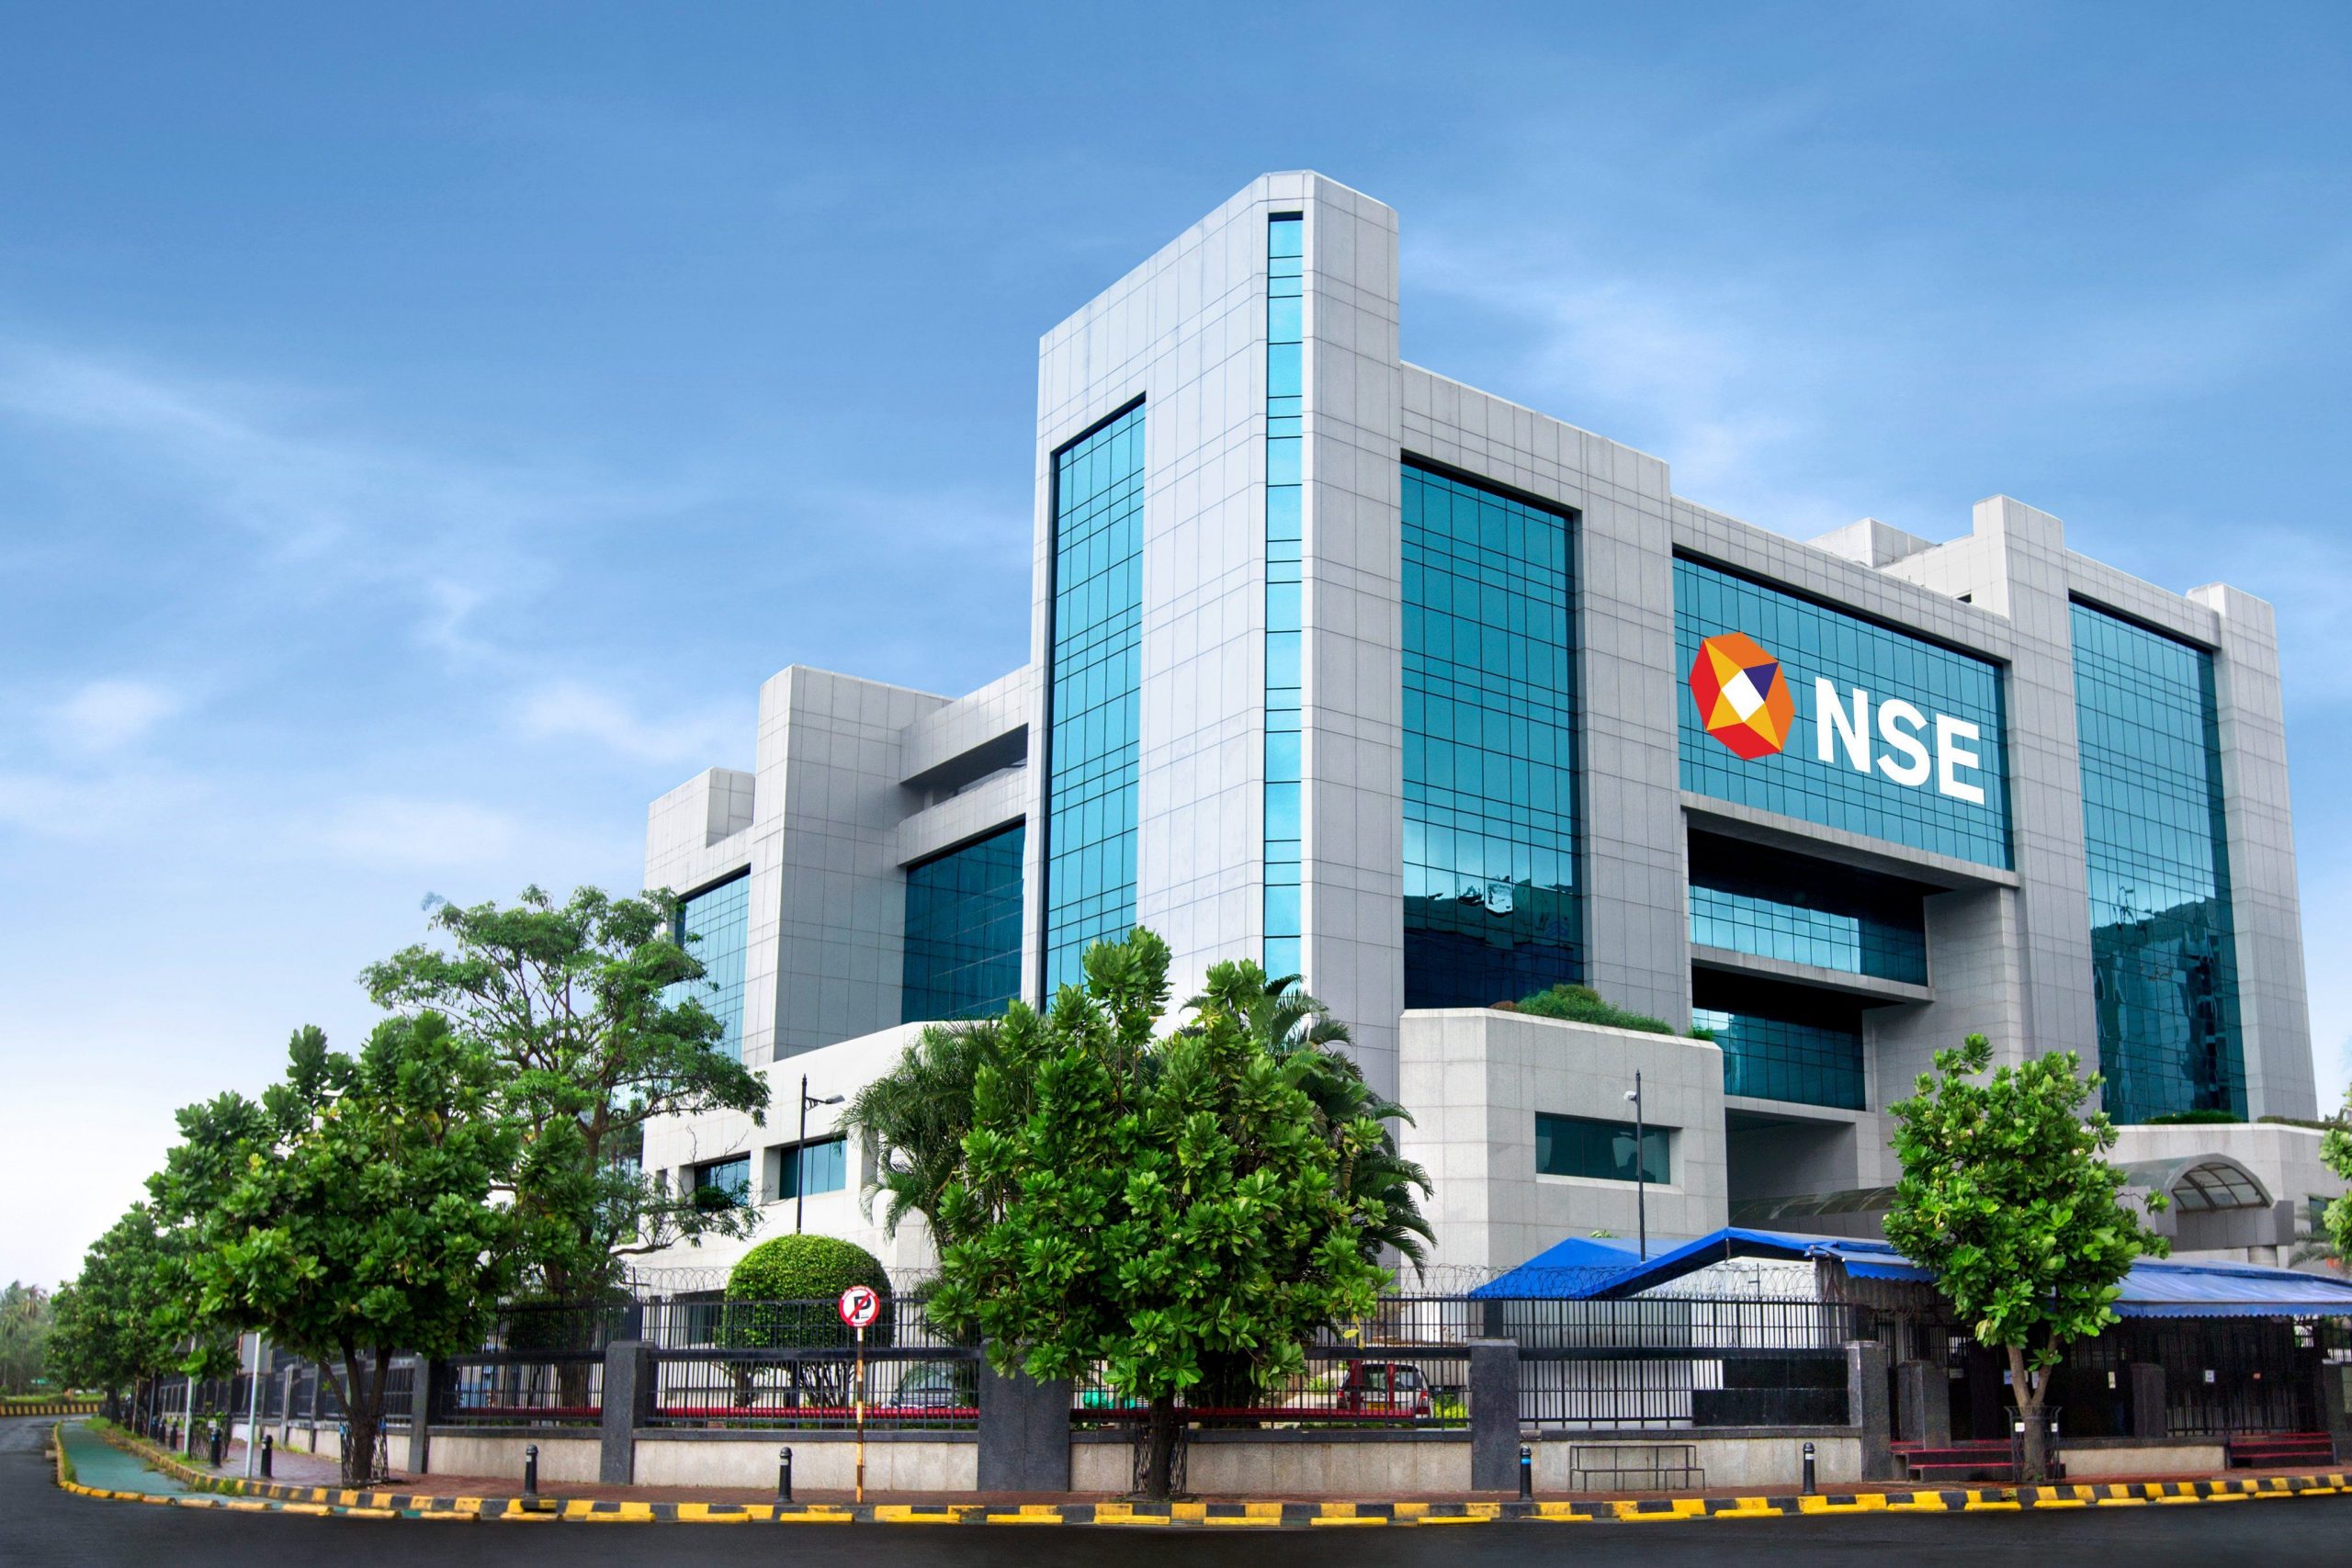 NSE F&O Ban: No stock has been put under ban on Wednesday, August 24, 2022